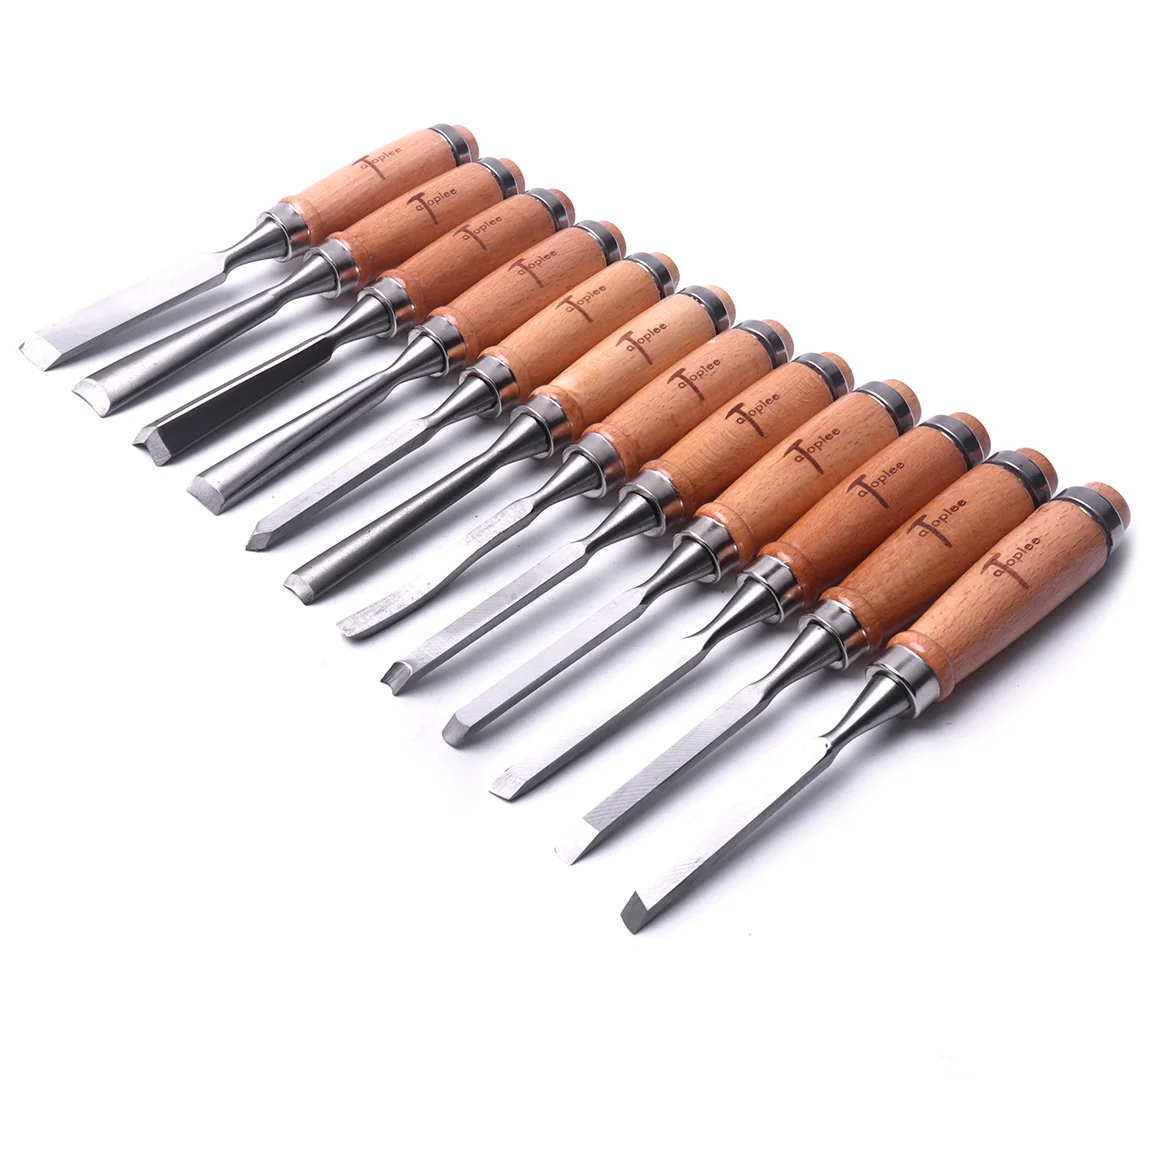 ATOPLEE 12pcs Wood Carving Chisel Set for Woodworking, Professional Wood Gouge Tools with Premium Case and Roll Up Bags for Carpenter Craftsman Gift